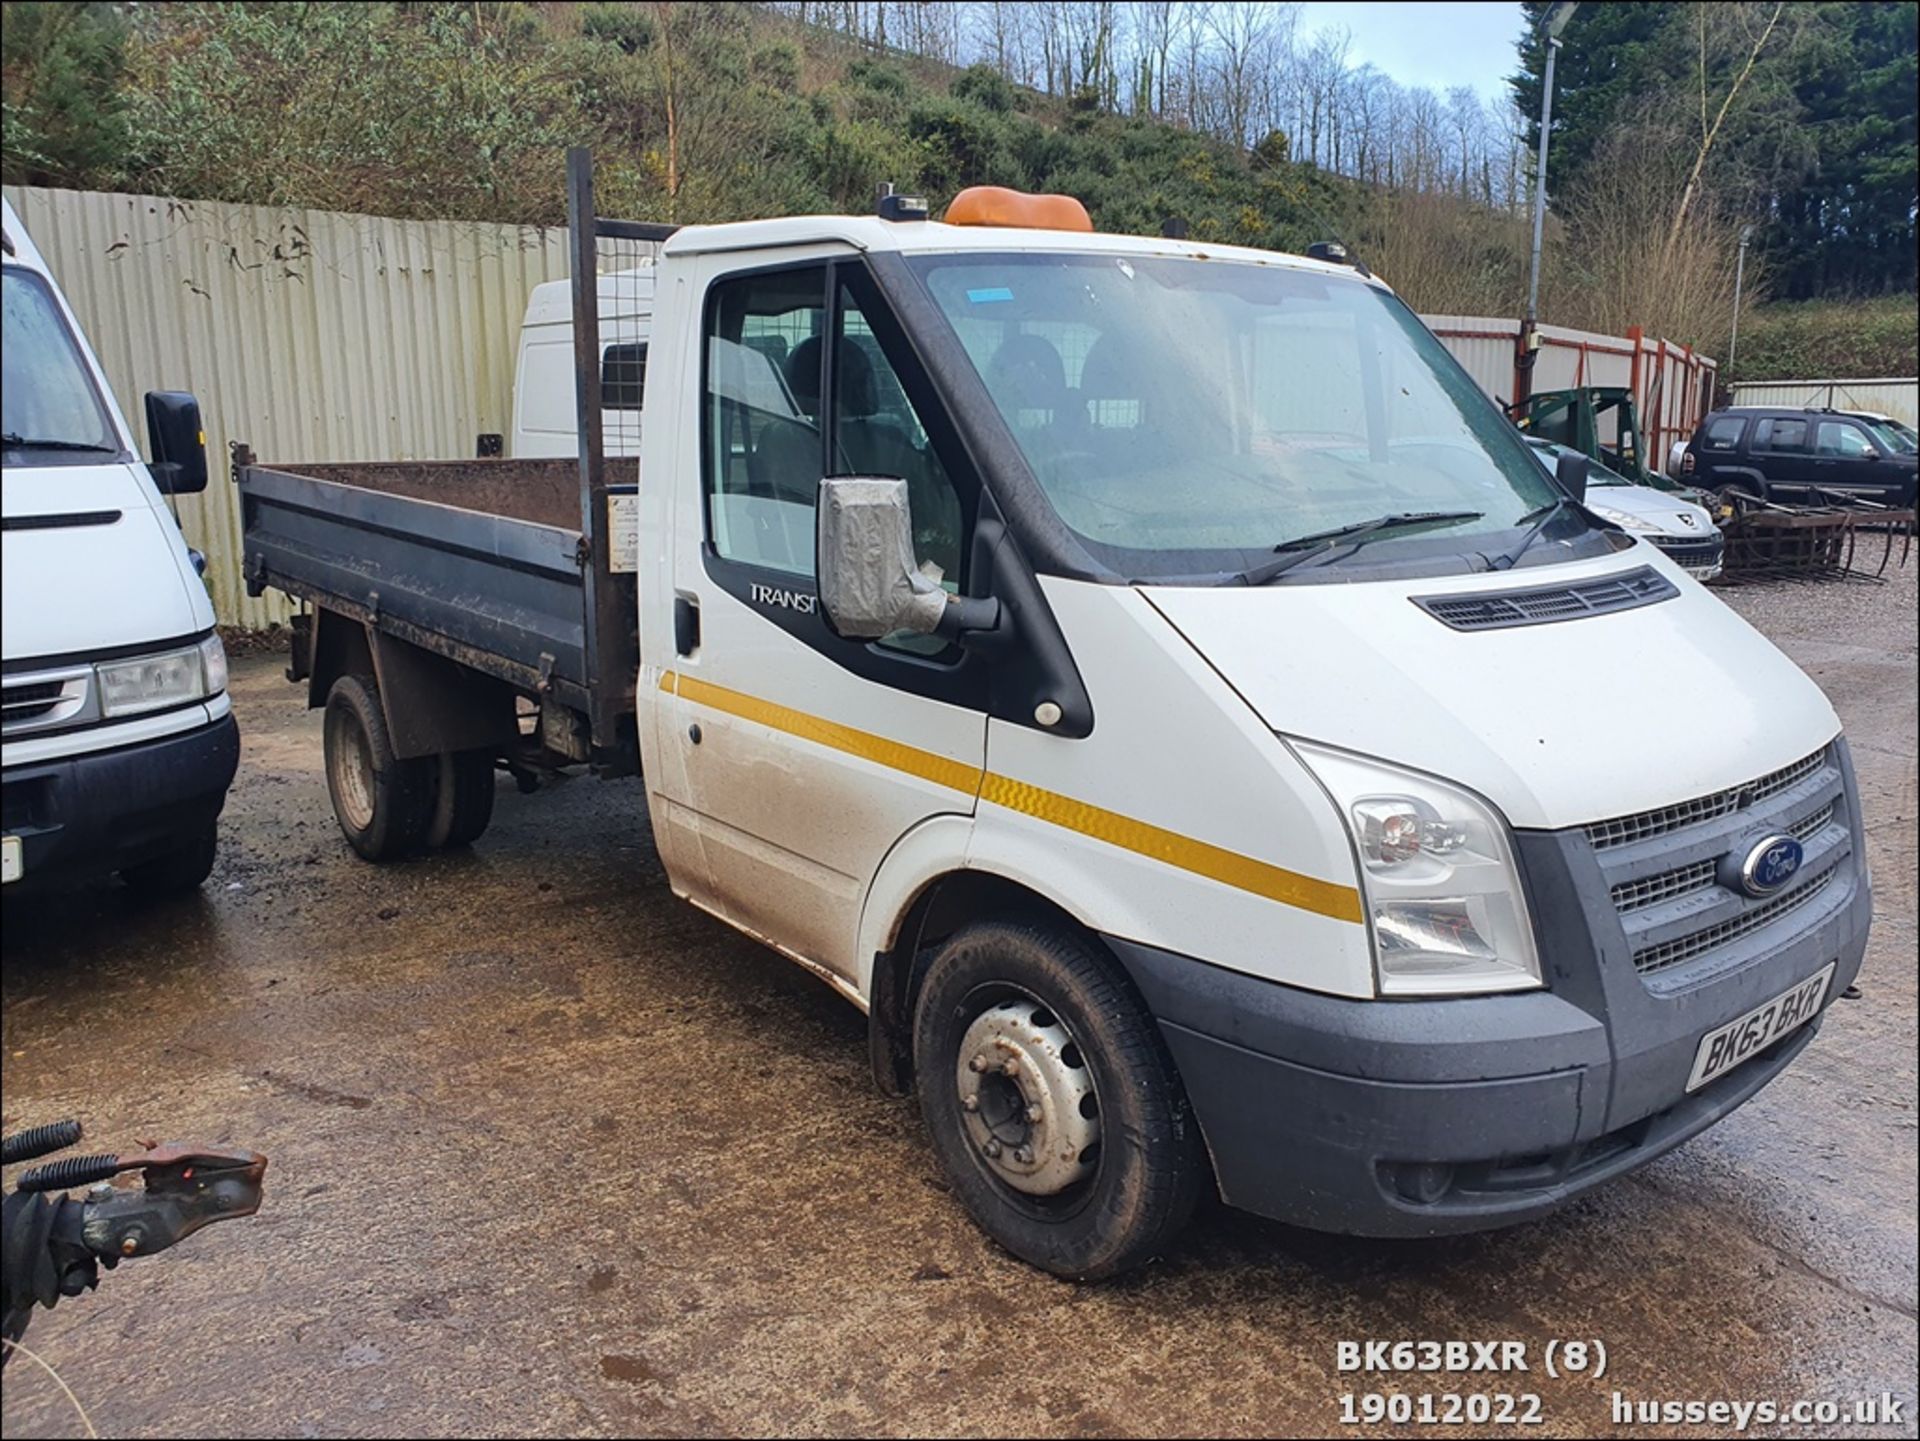 13/63 FORD TRANSIT 100 T350 RWD - 2198cc 2dr Tipper (White, 113k) - Image 8 of 14